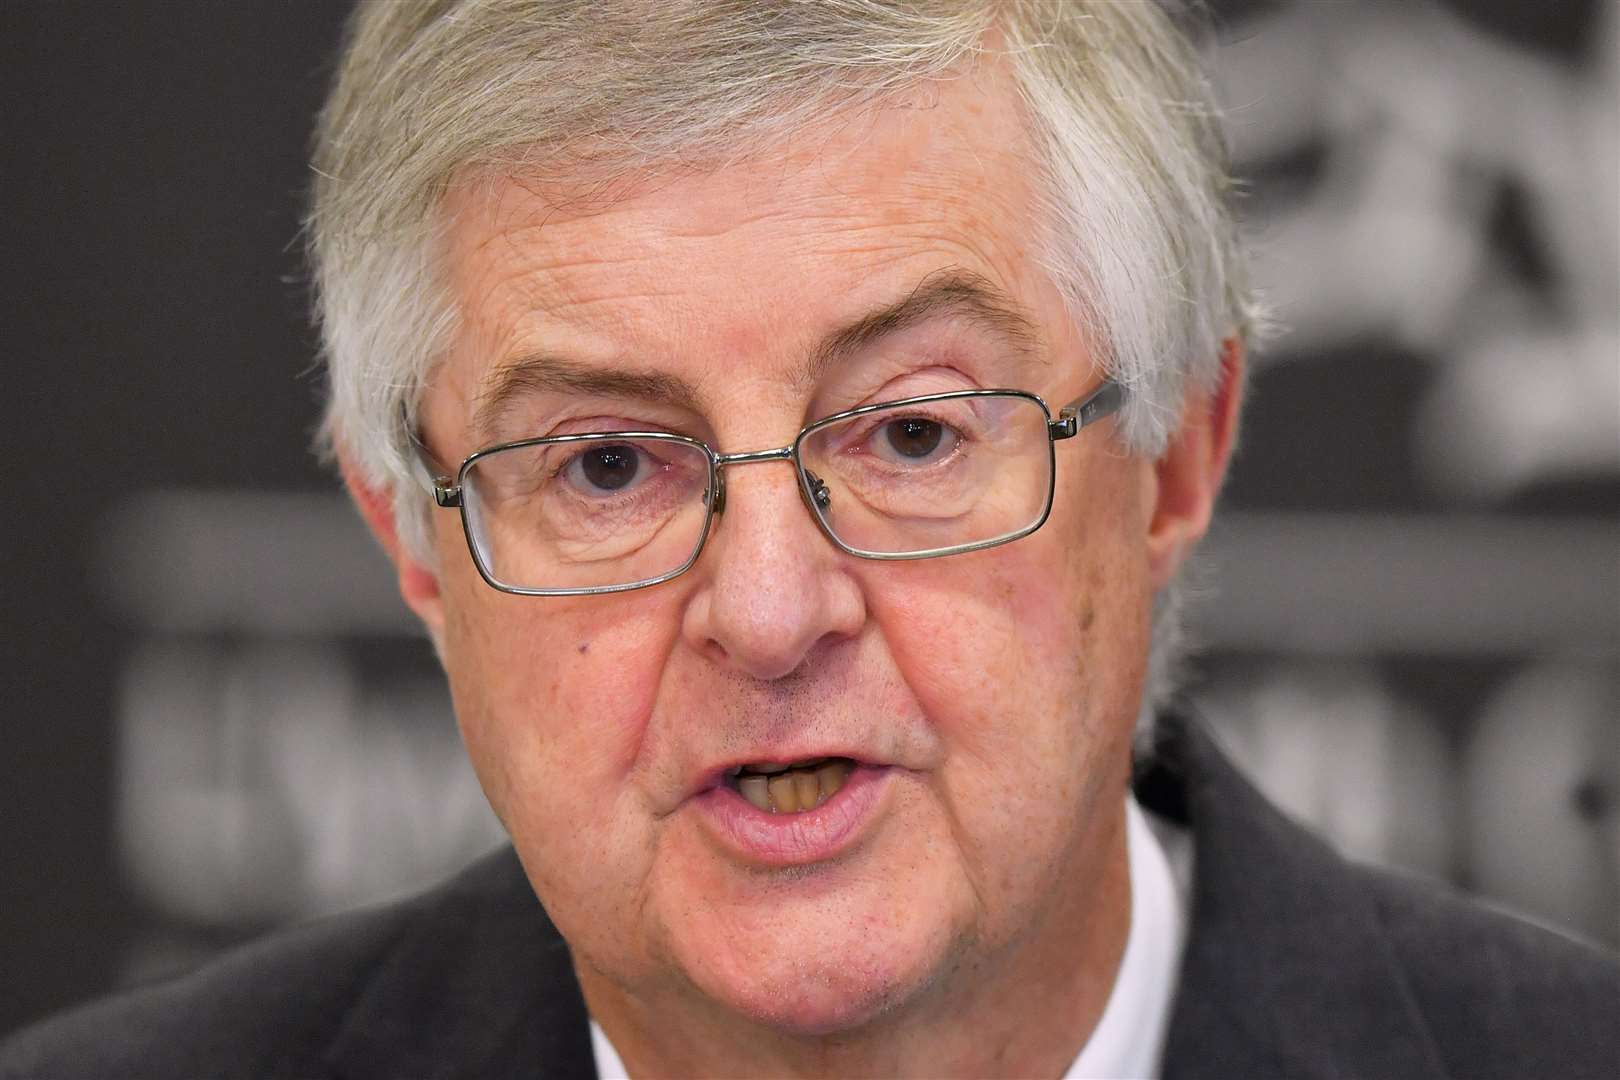 Mark Drakeford said American leadership is needed on issues like climate change (Ben Birchall/PA)